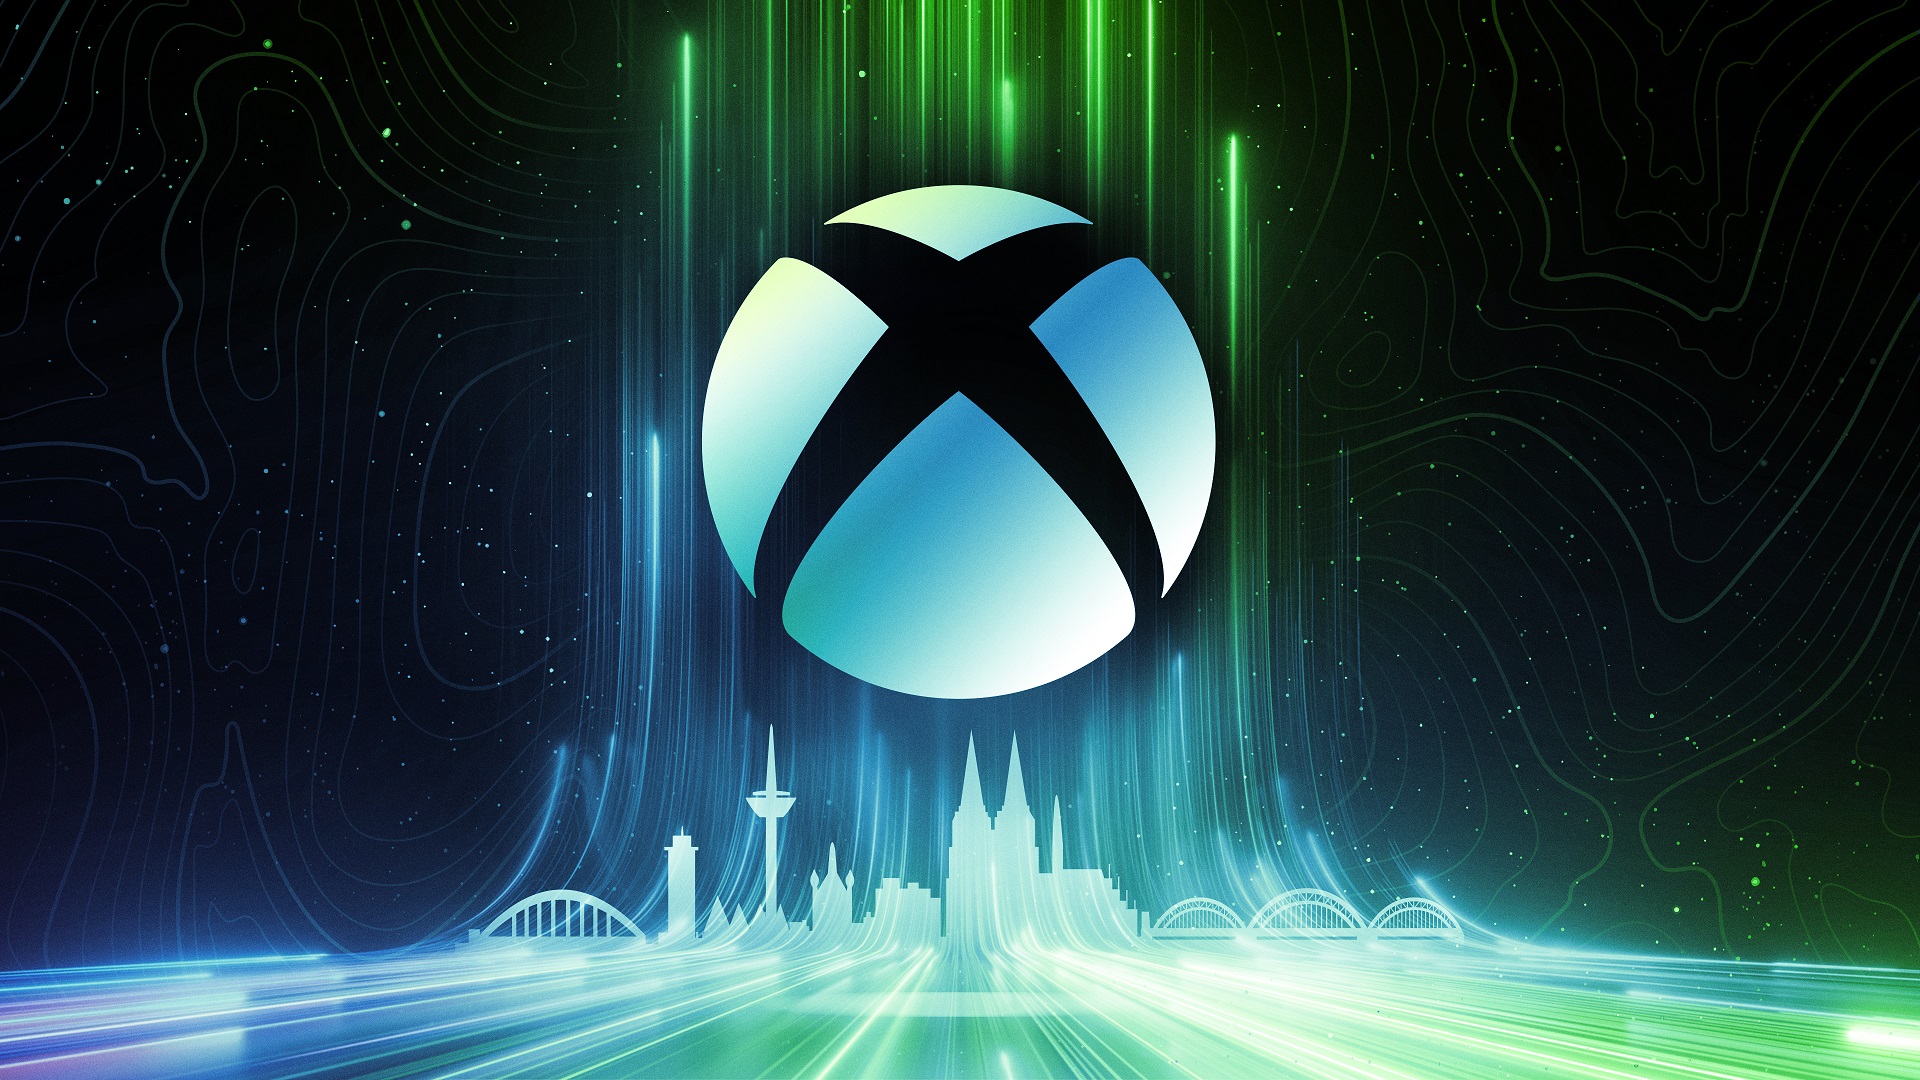 Video Game Xbox HD Wallpaper | Background Image